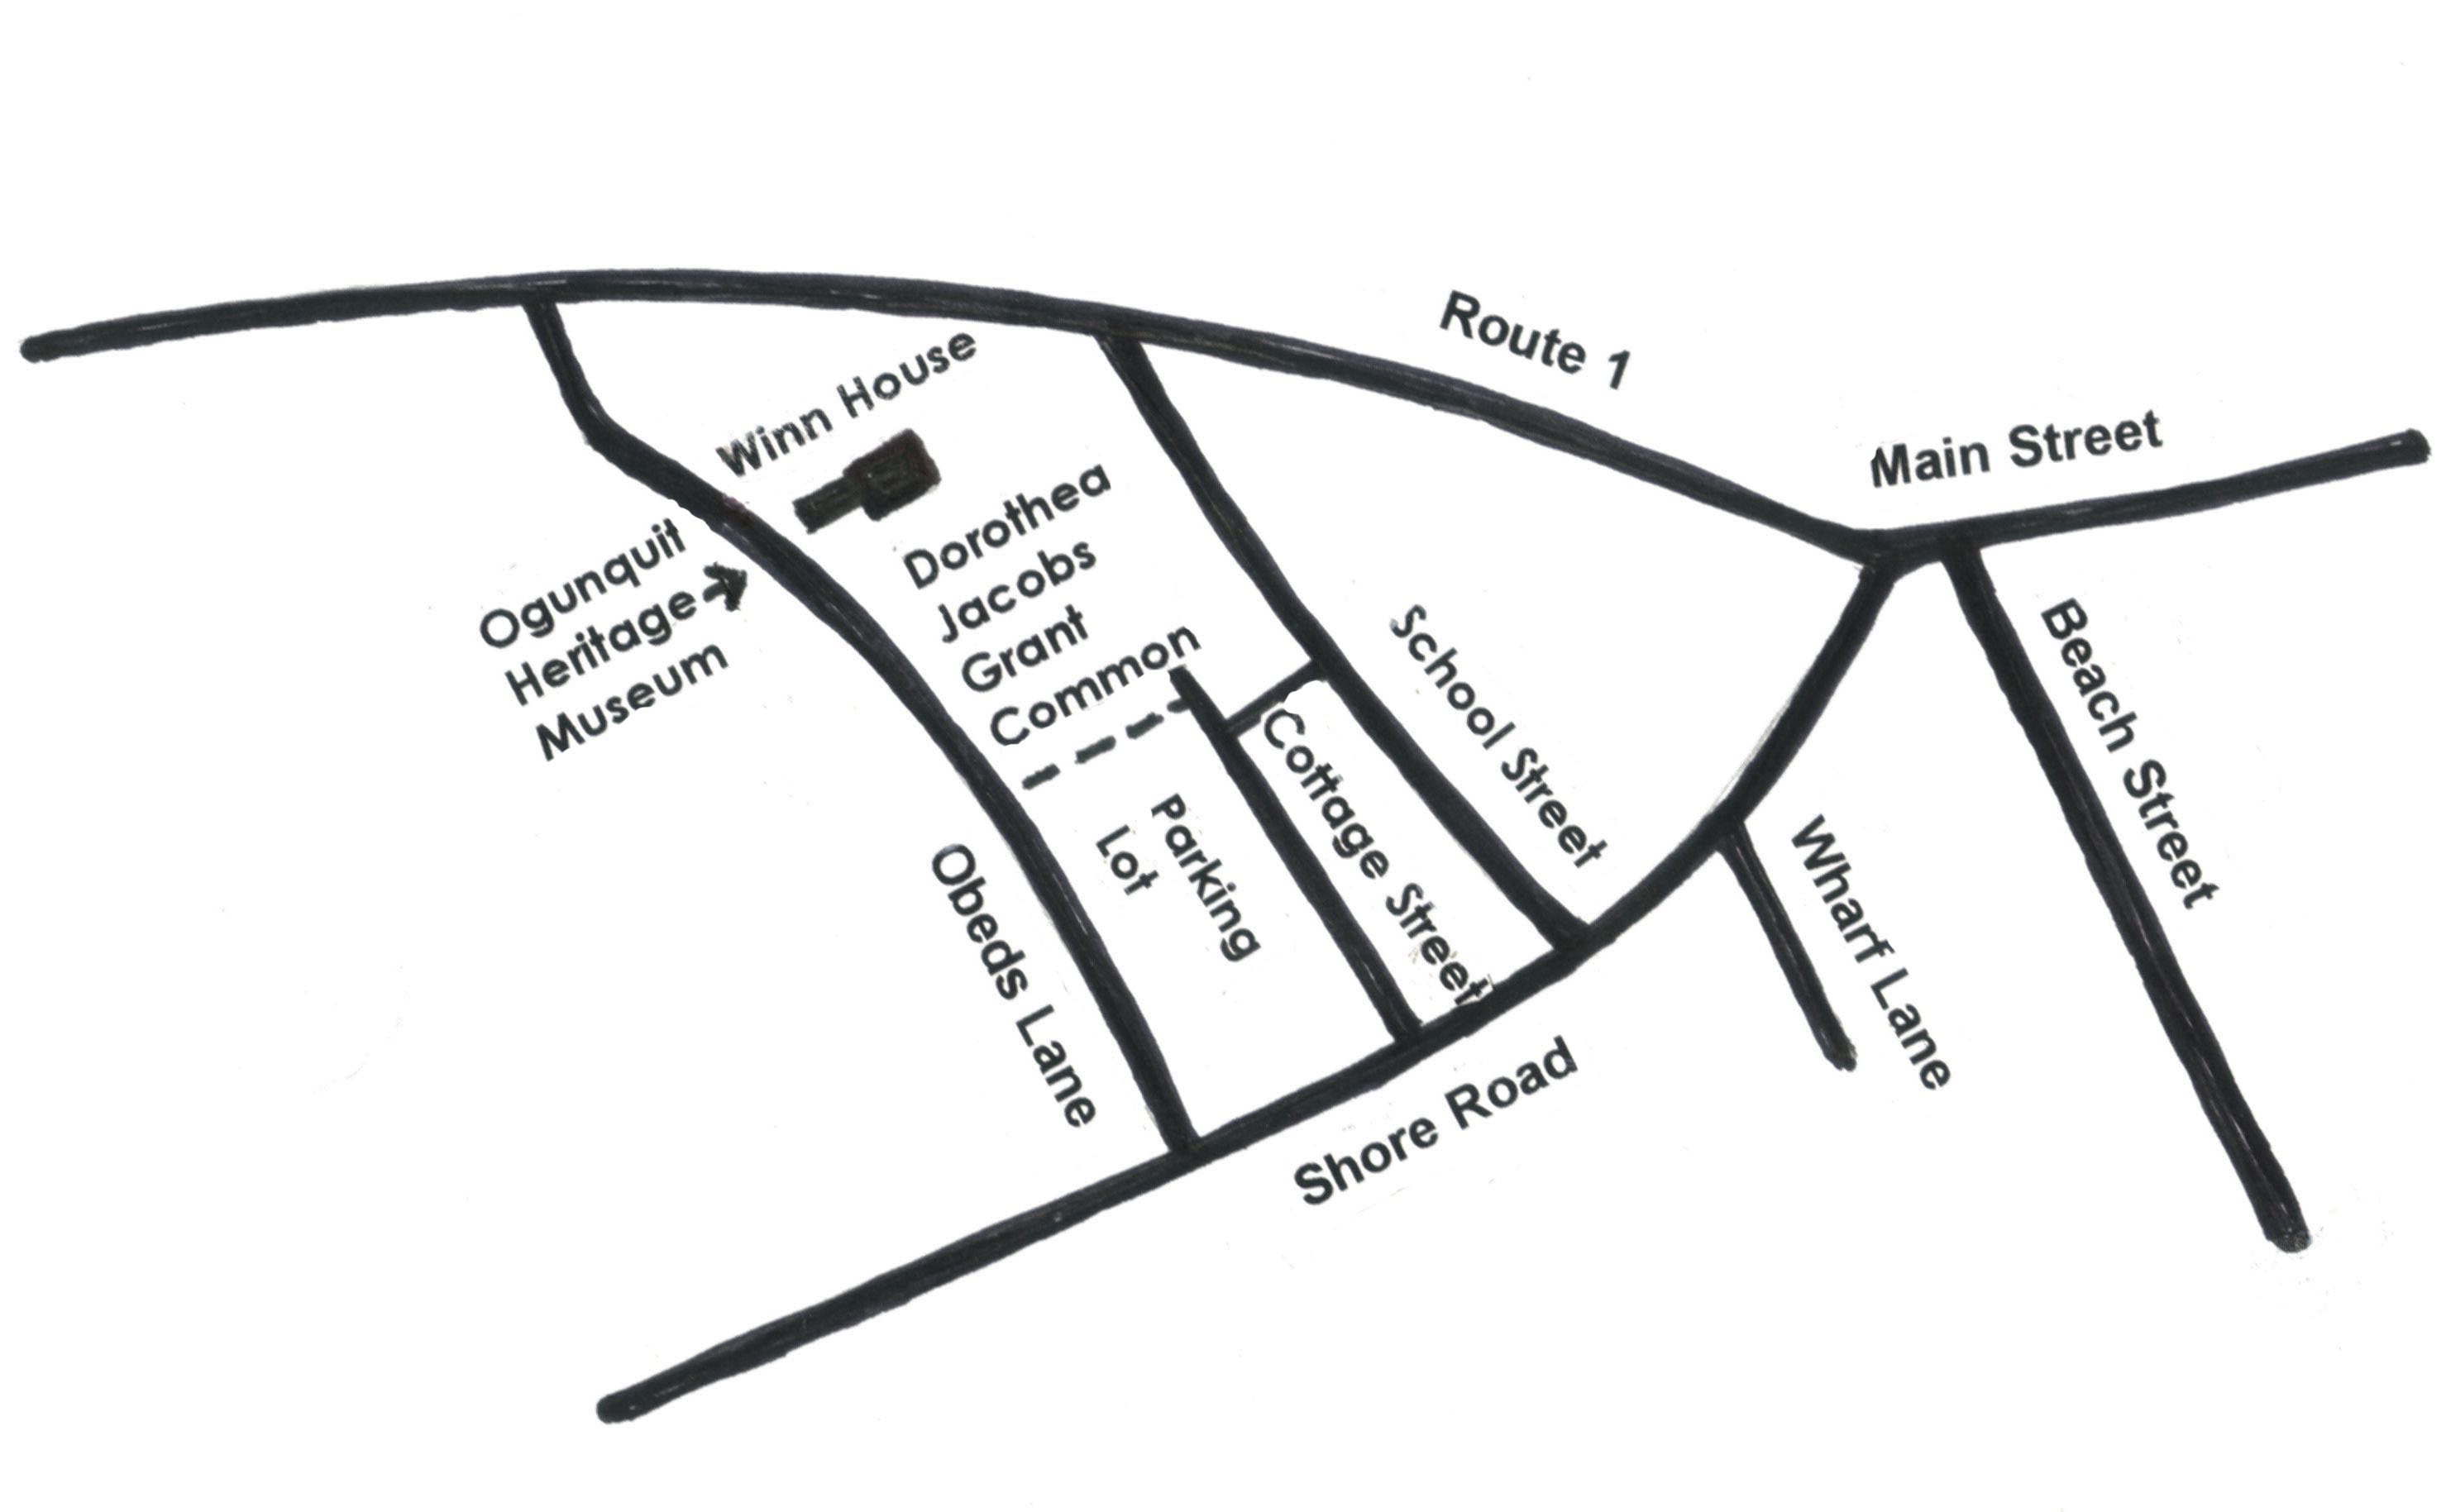 Map showing museum location